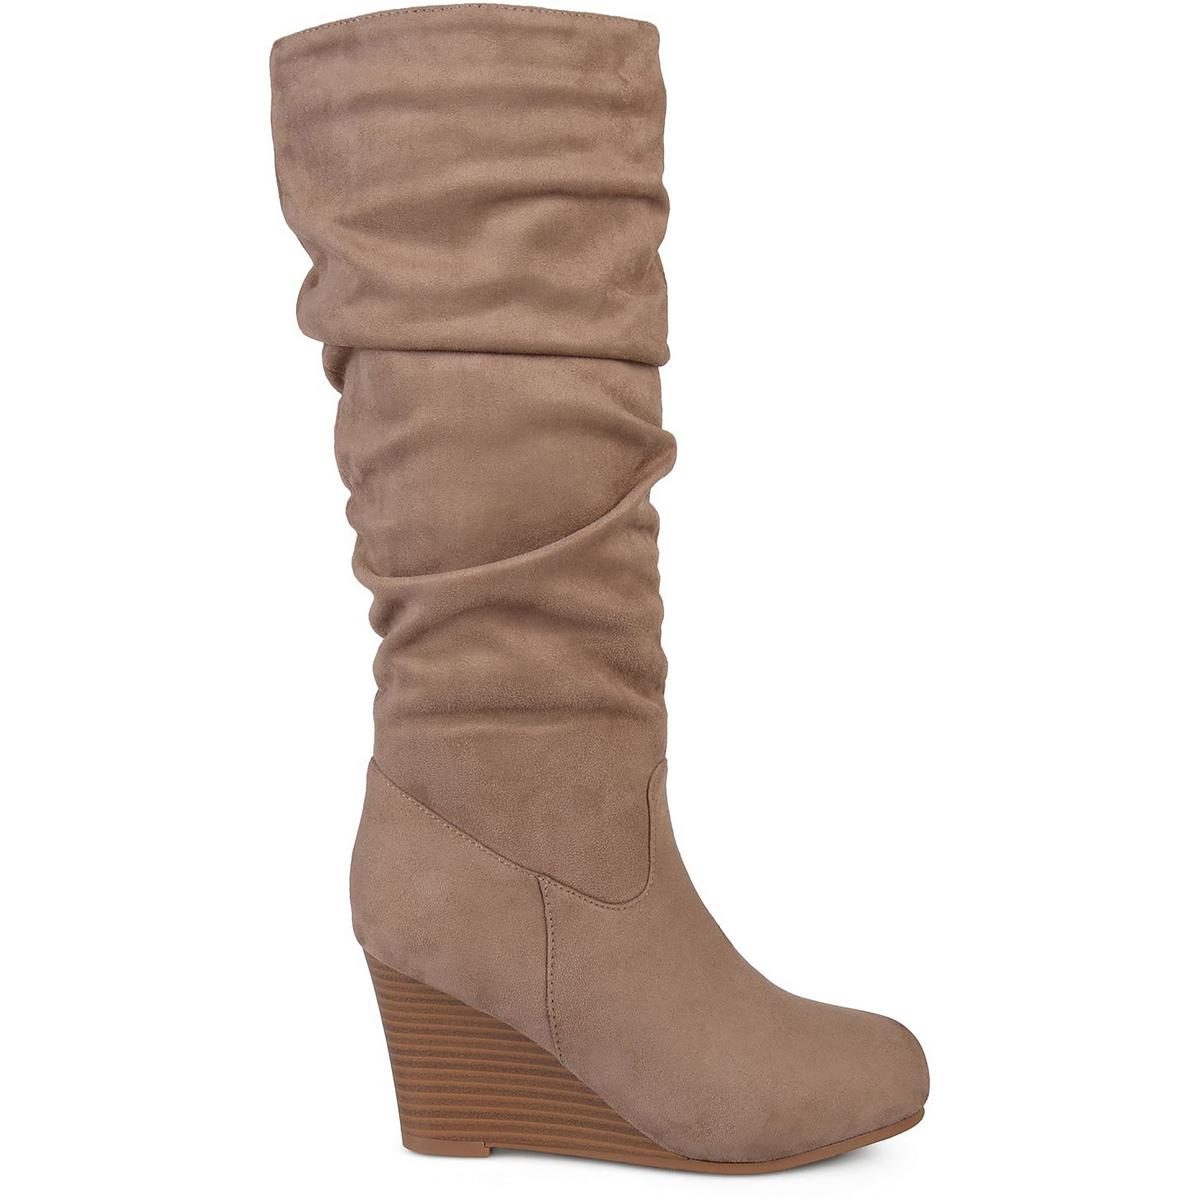 Journee Collection Haze Womens Faux Suede Wide Calf Mid-Calf Boots